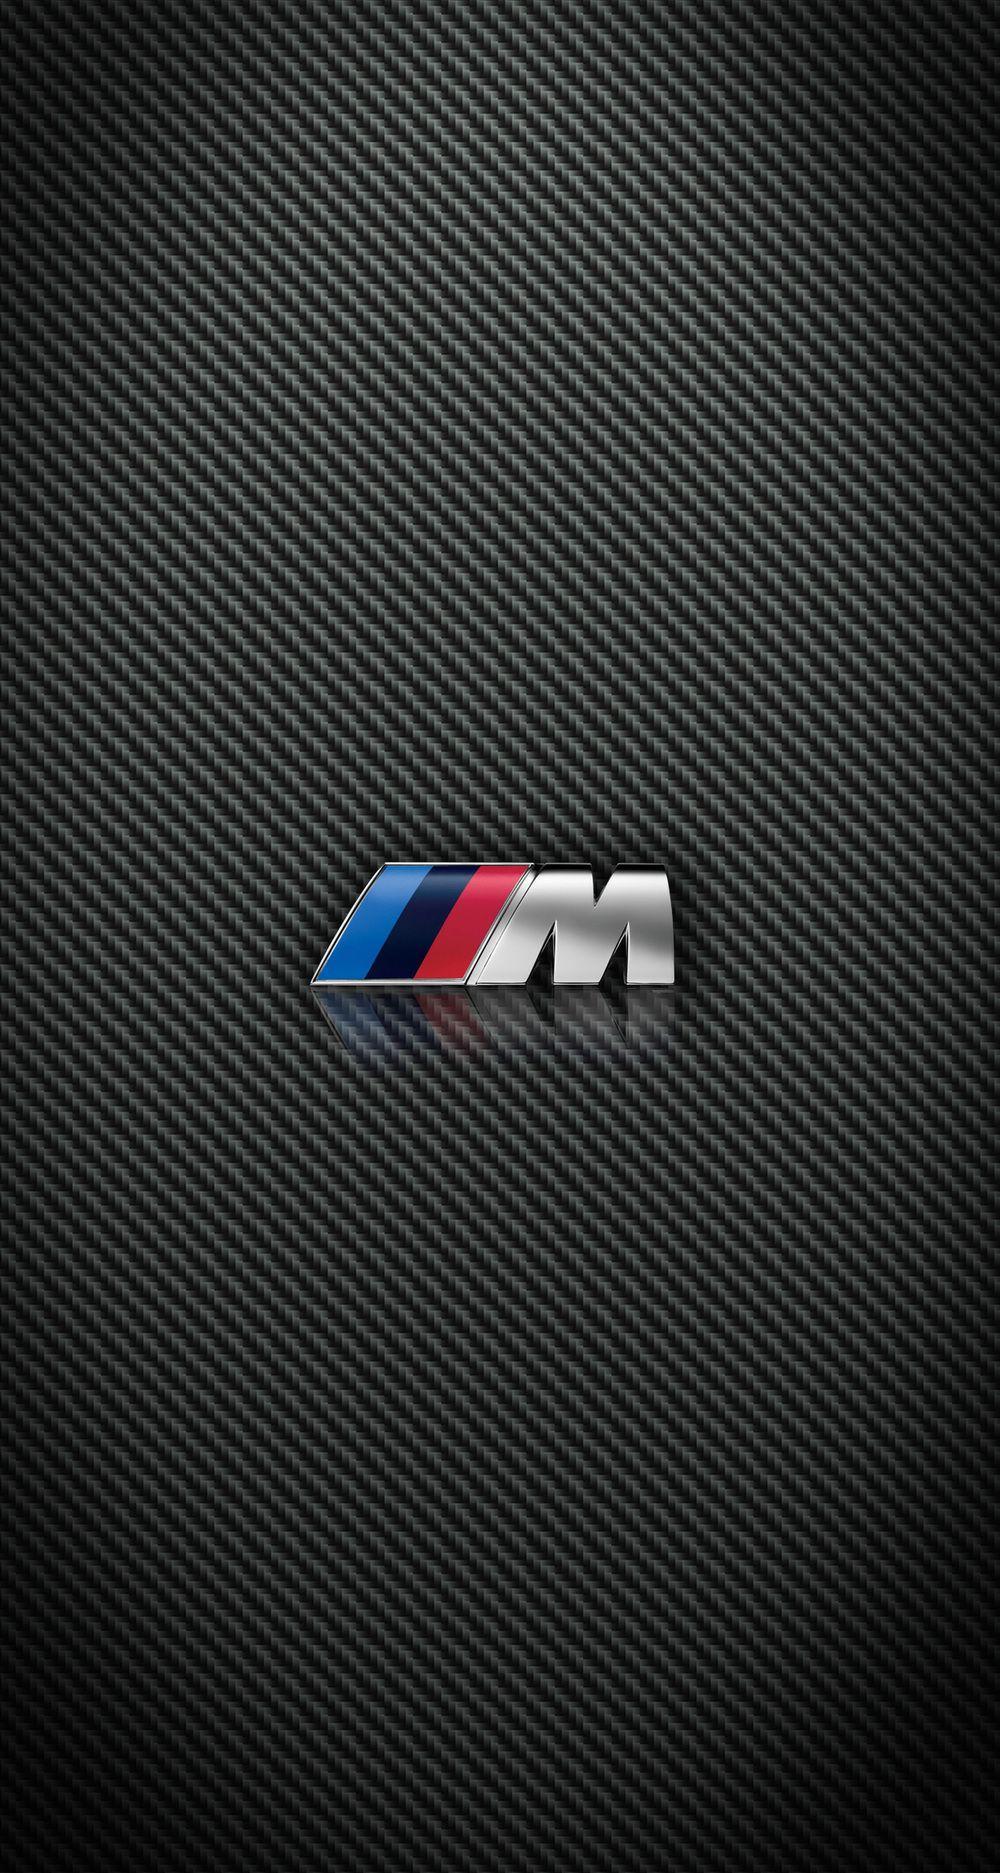 M-Power Wallpapers - Wallpaper Cave